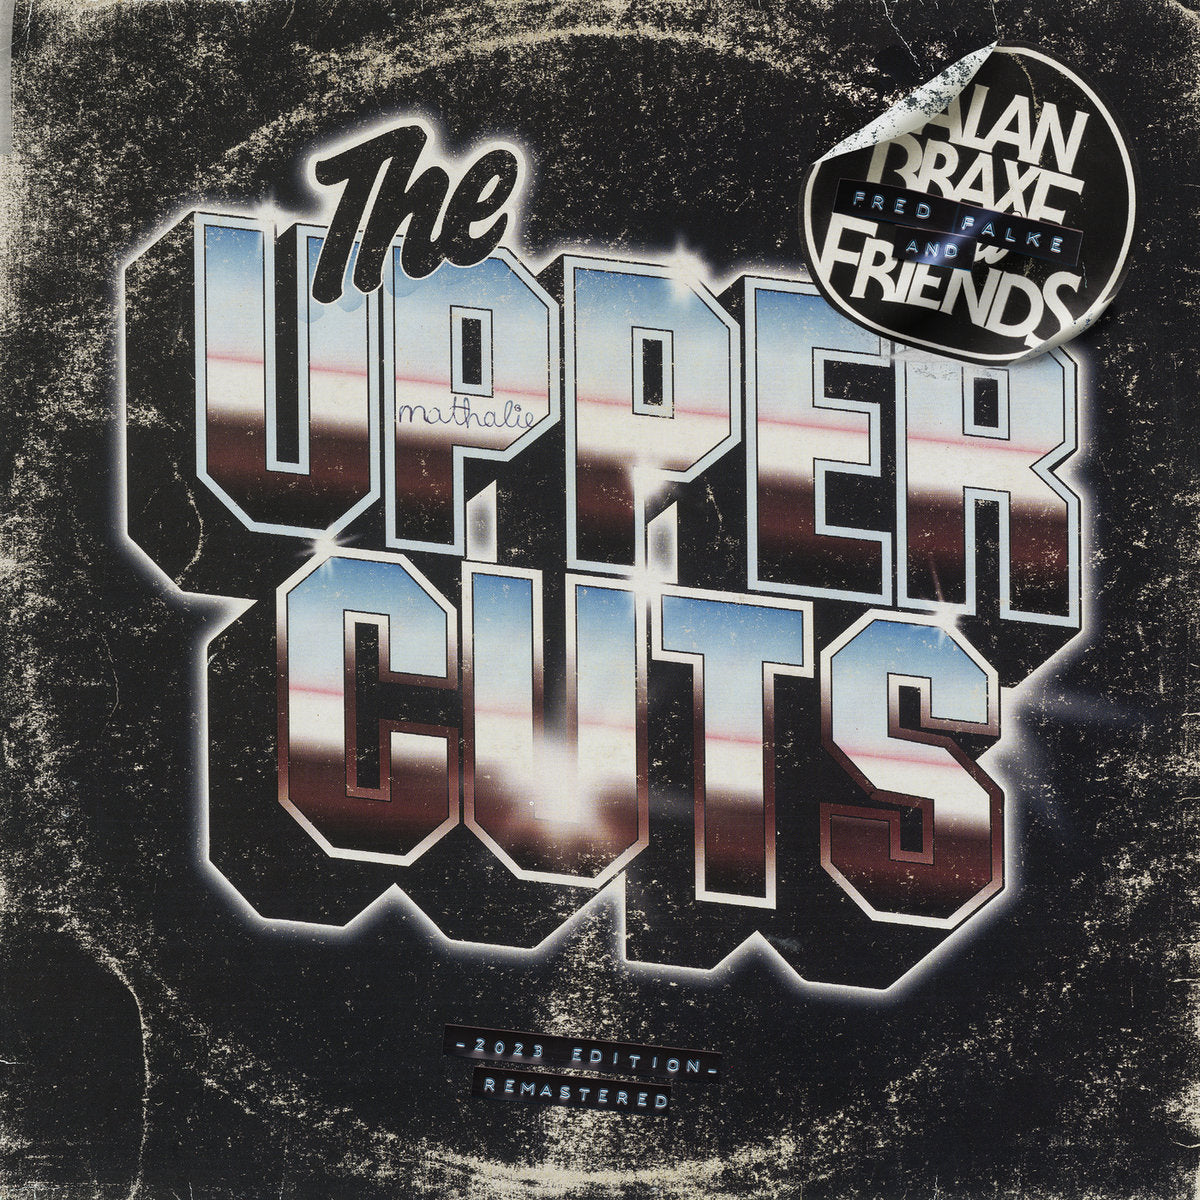 Alan Braxe, Fred Falke & Friends - The Upper Cuts  [Exclusive Rose Pink And Baby Blue Vinyl]